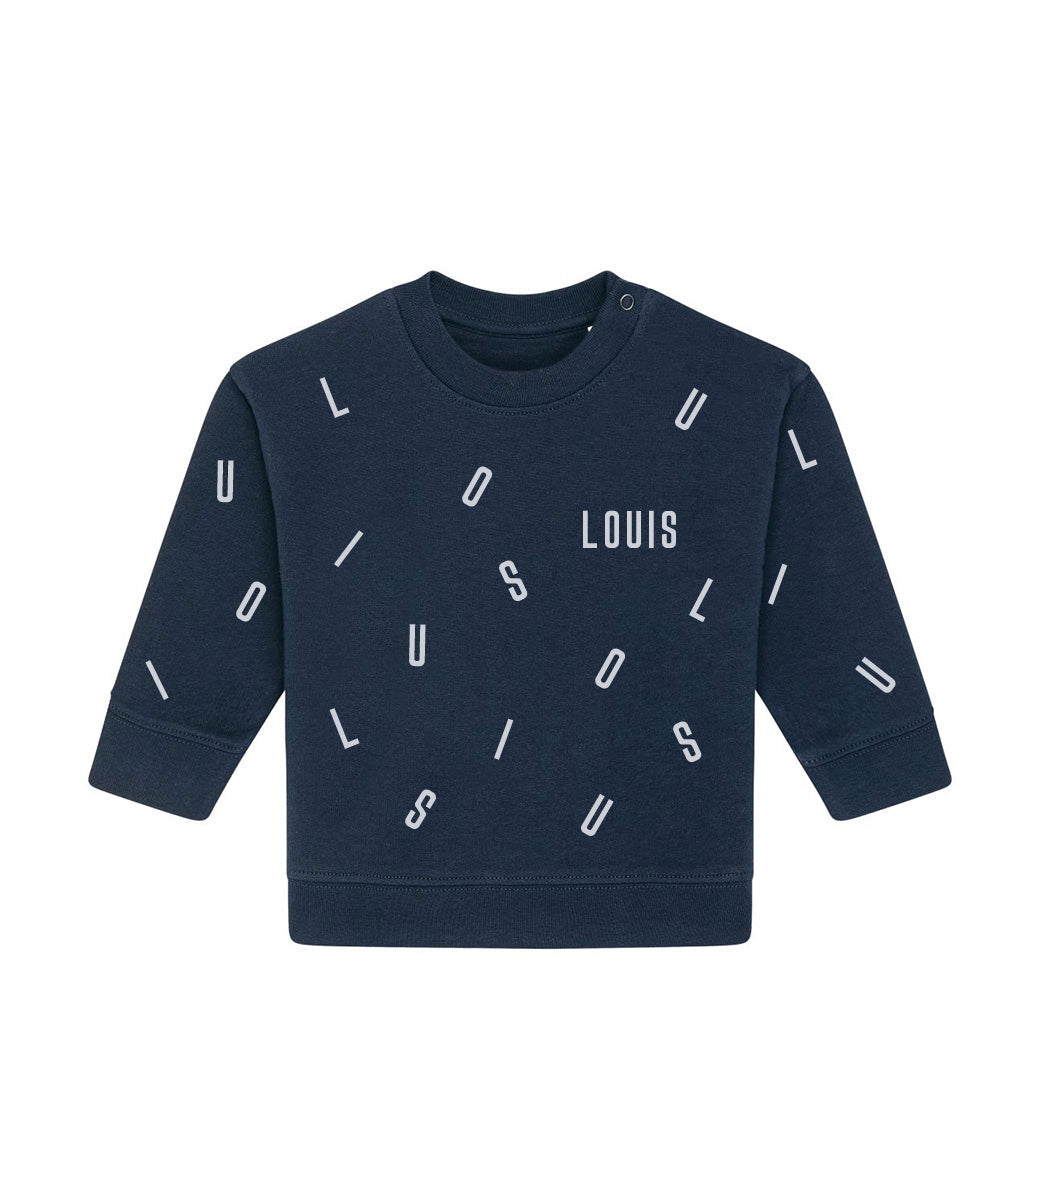 Organic sweater // Dancing letters - with name